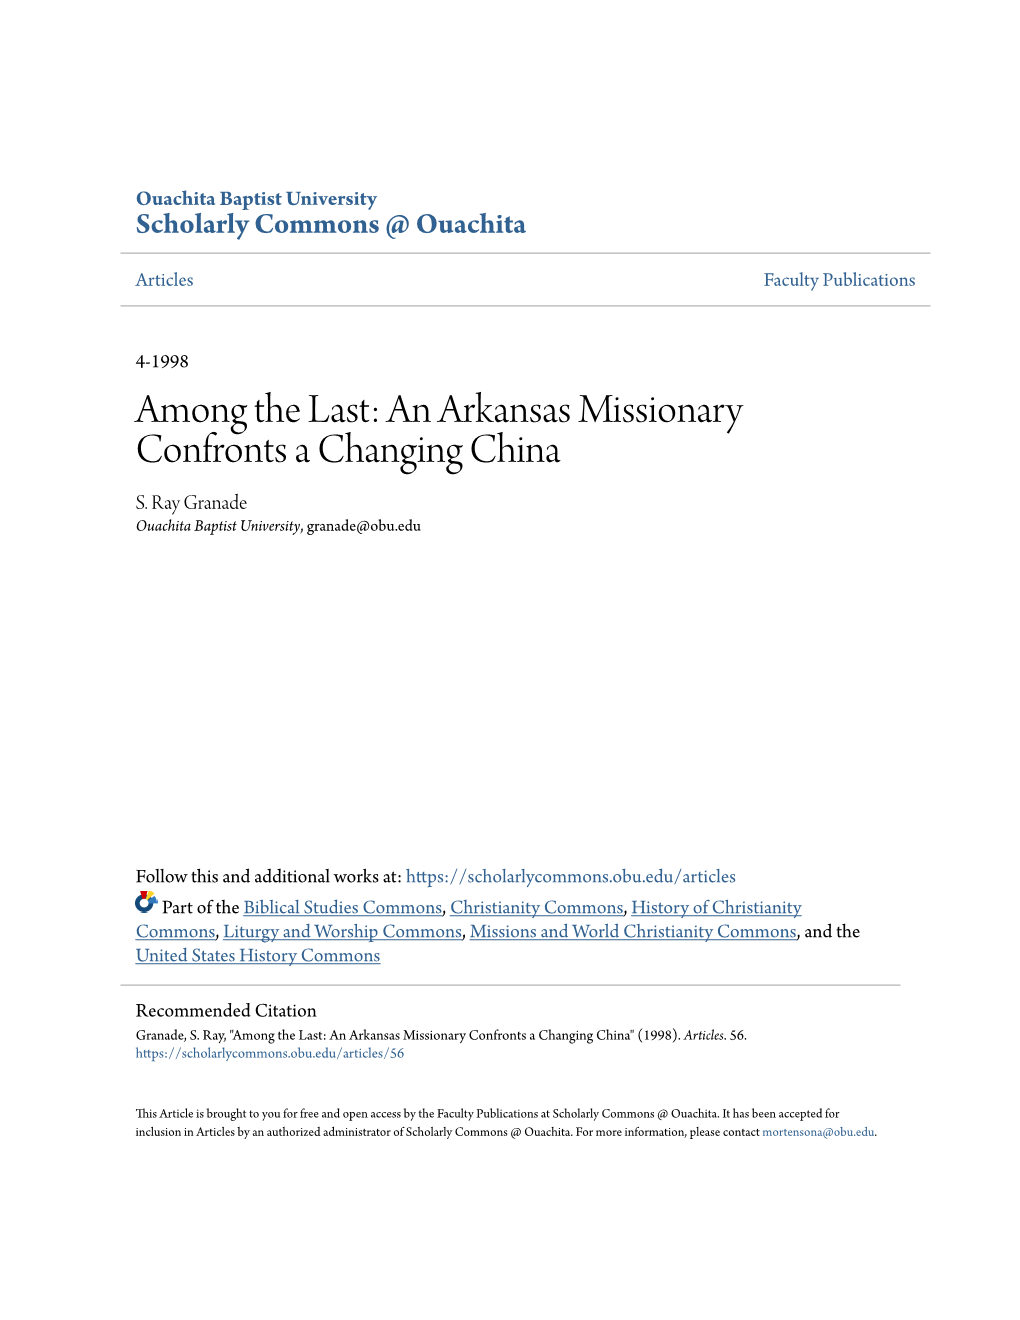 Among the Last: an Arkansas Missionary Confronts a Changing China S